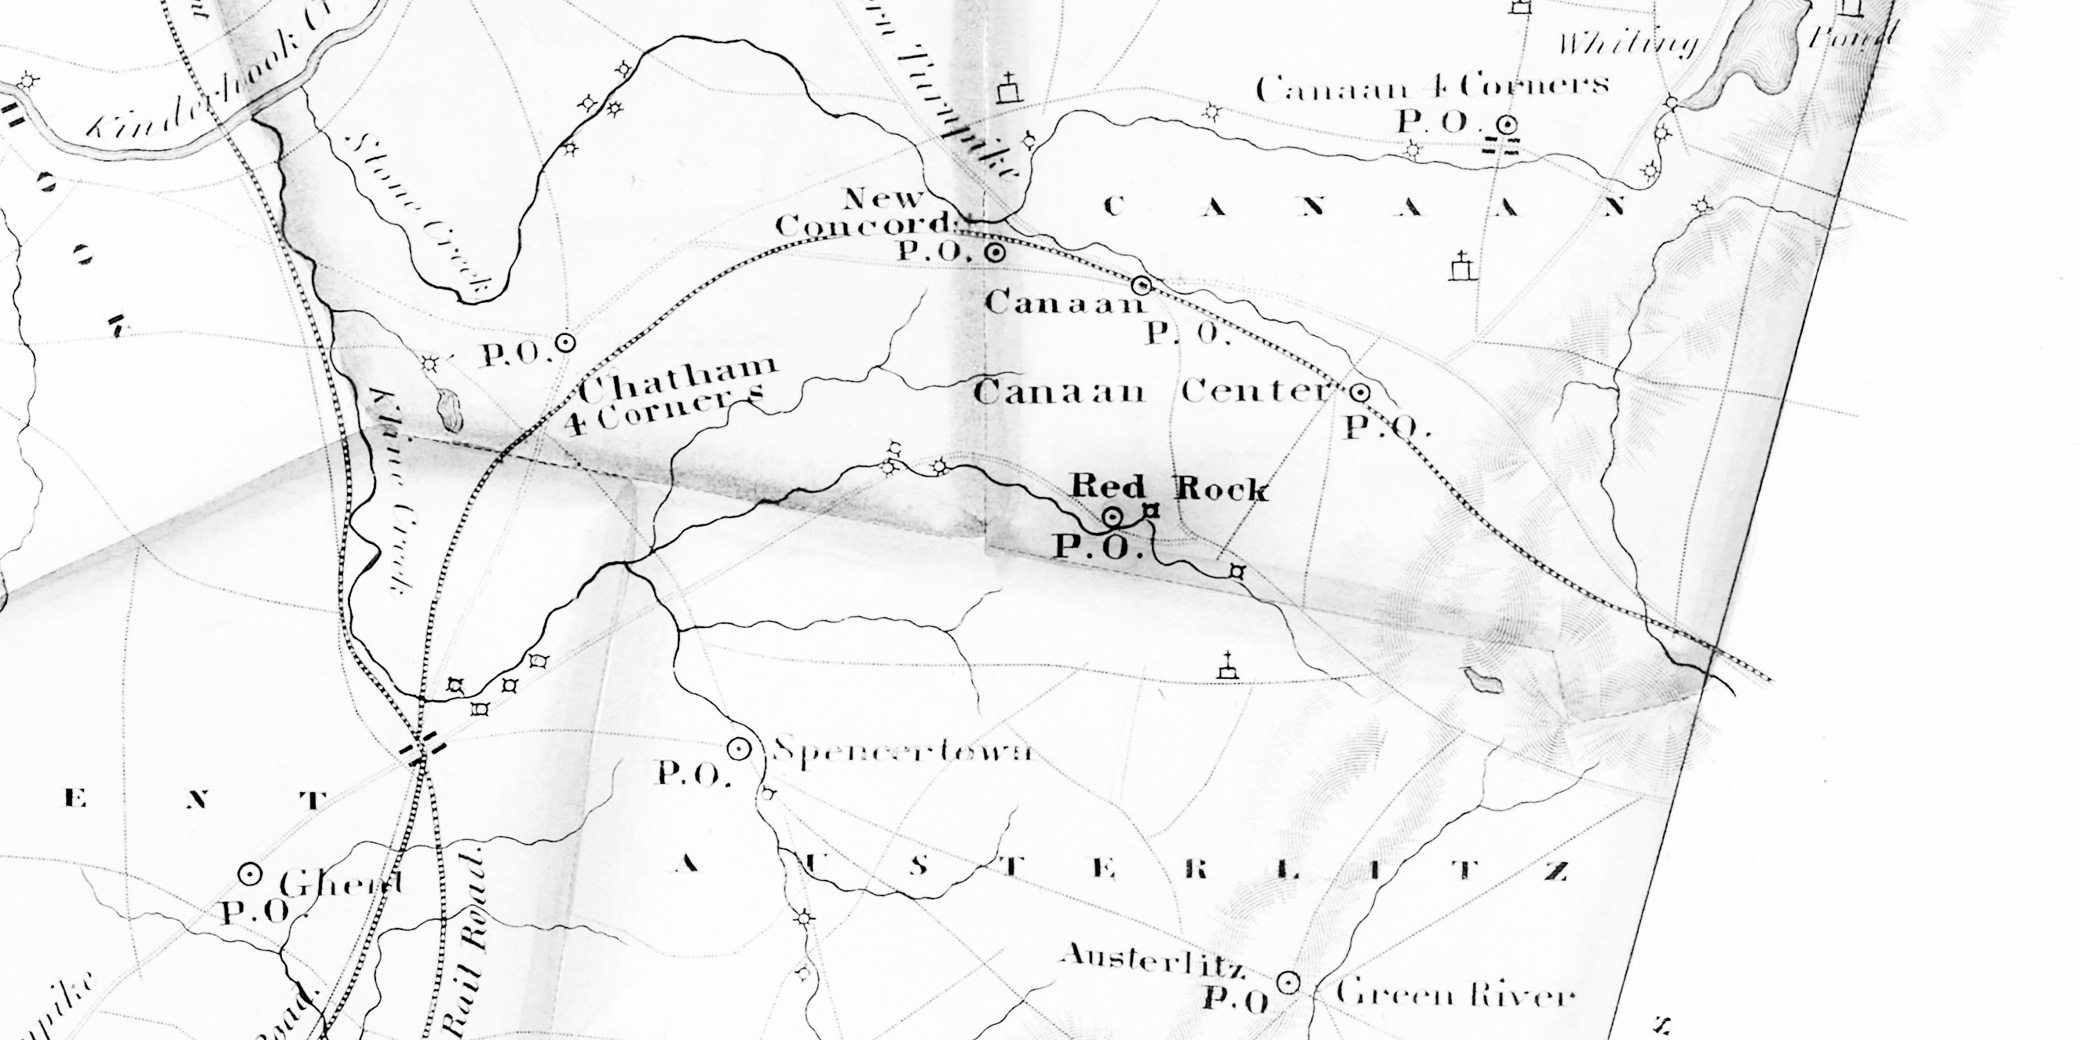 Red Rock area detail from Burr 1839 Columbia County NY map.